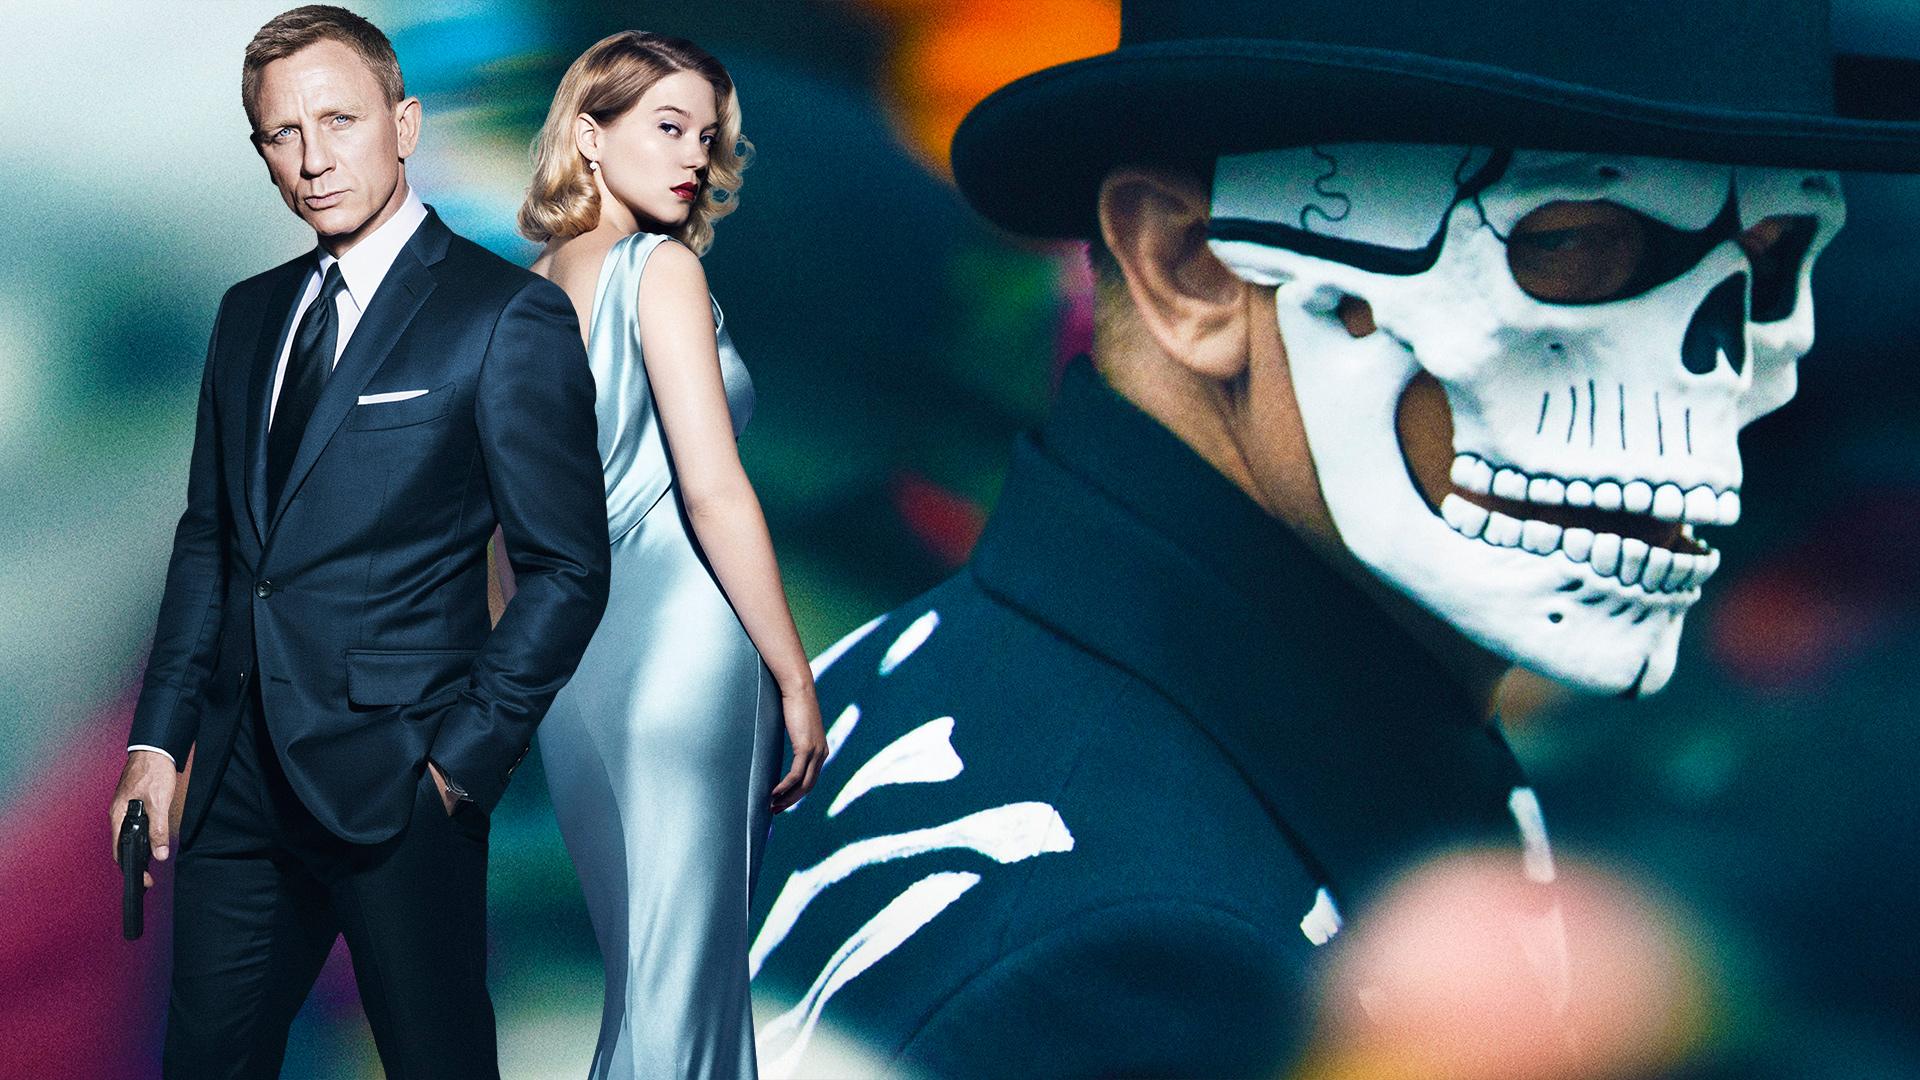 Lea Seydoux's Journey to Becoming the New Bond Girl in SPECTRE